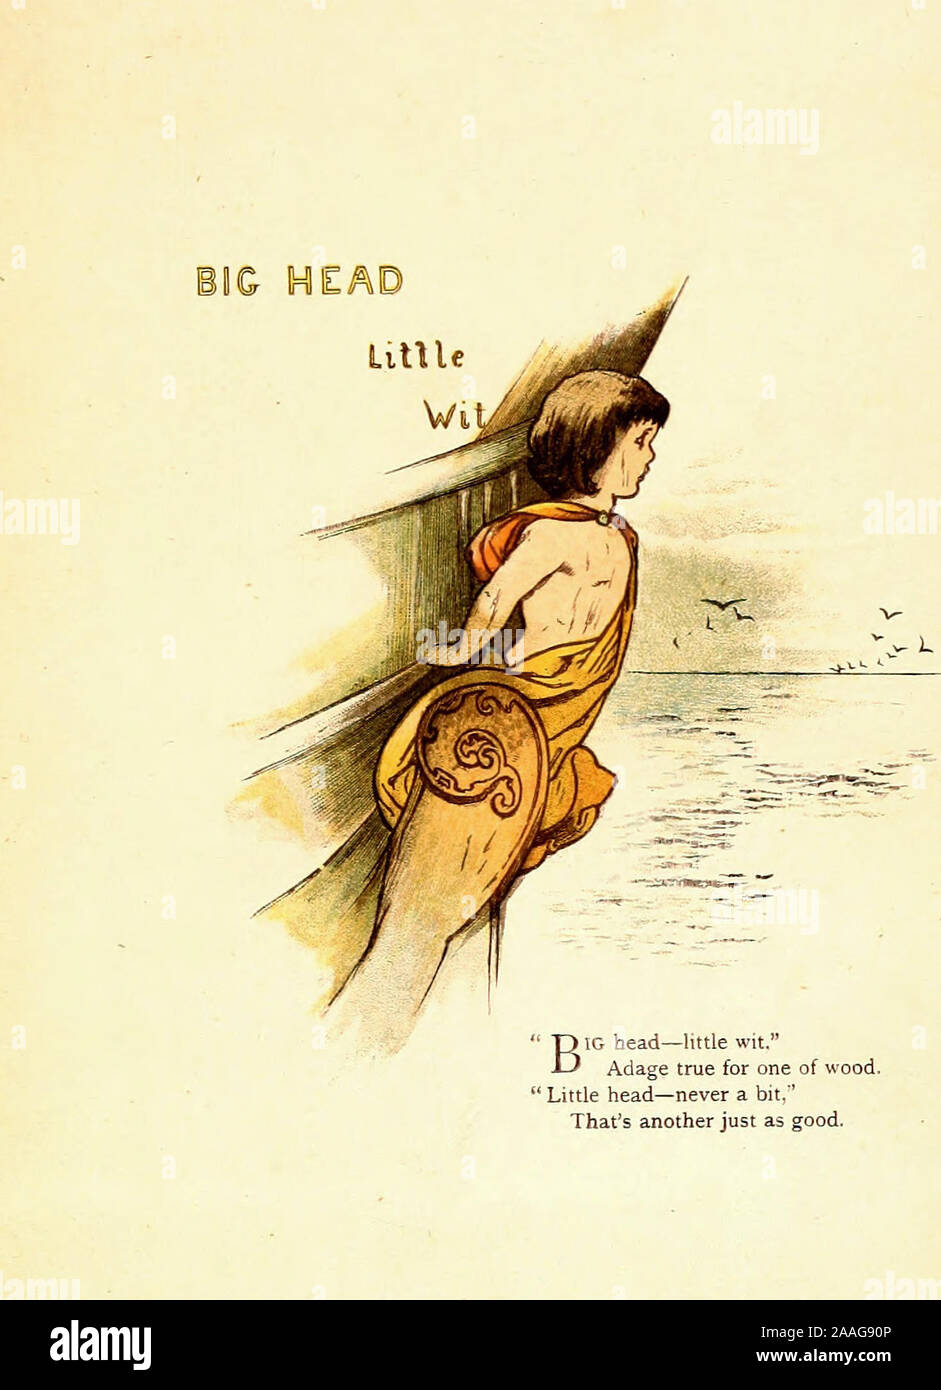 Big Head, Little Wit - Vintage Illustration of an Old Proverb Stock Photo